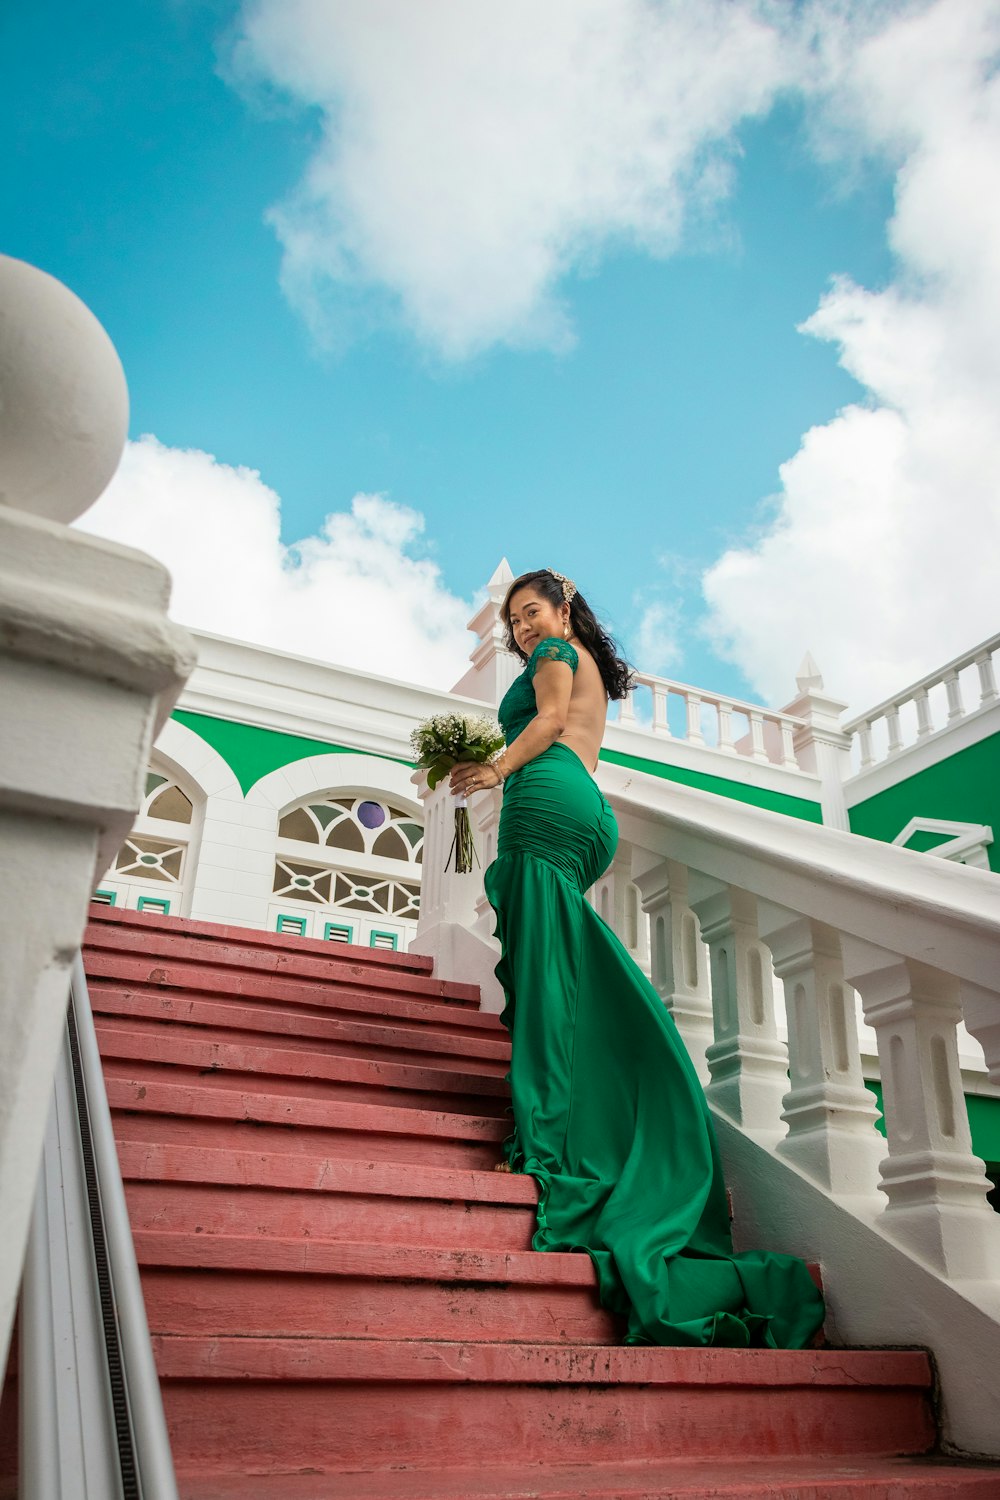 a beautiful woman in a green dress standing on some stairs